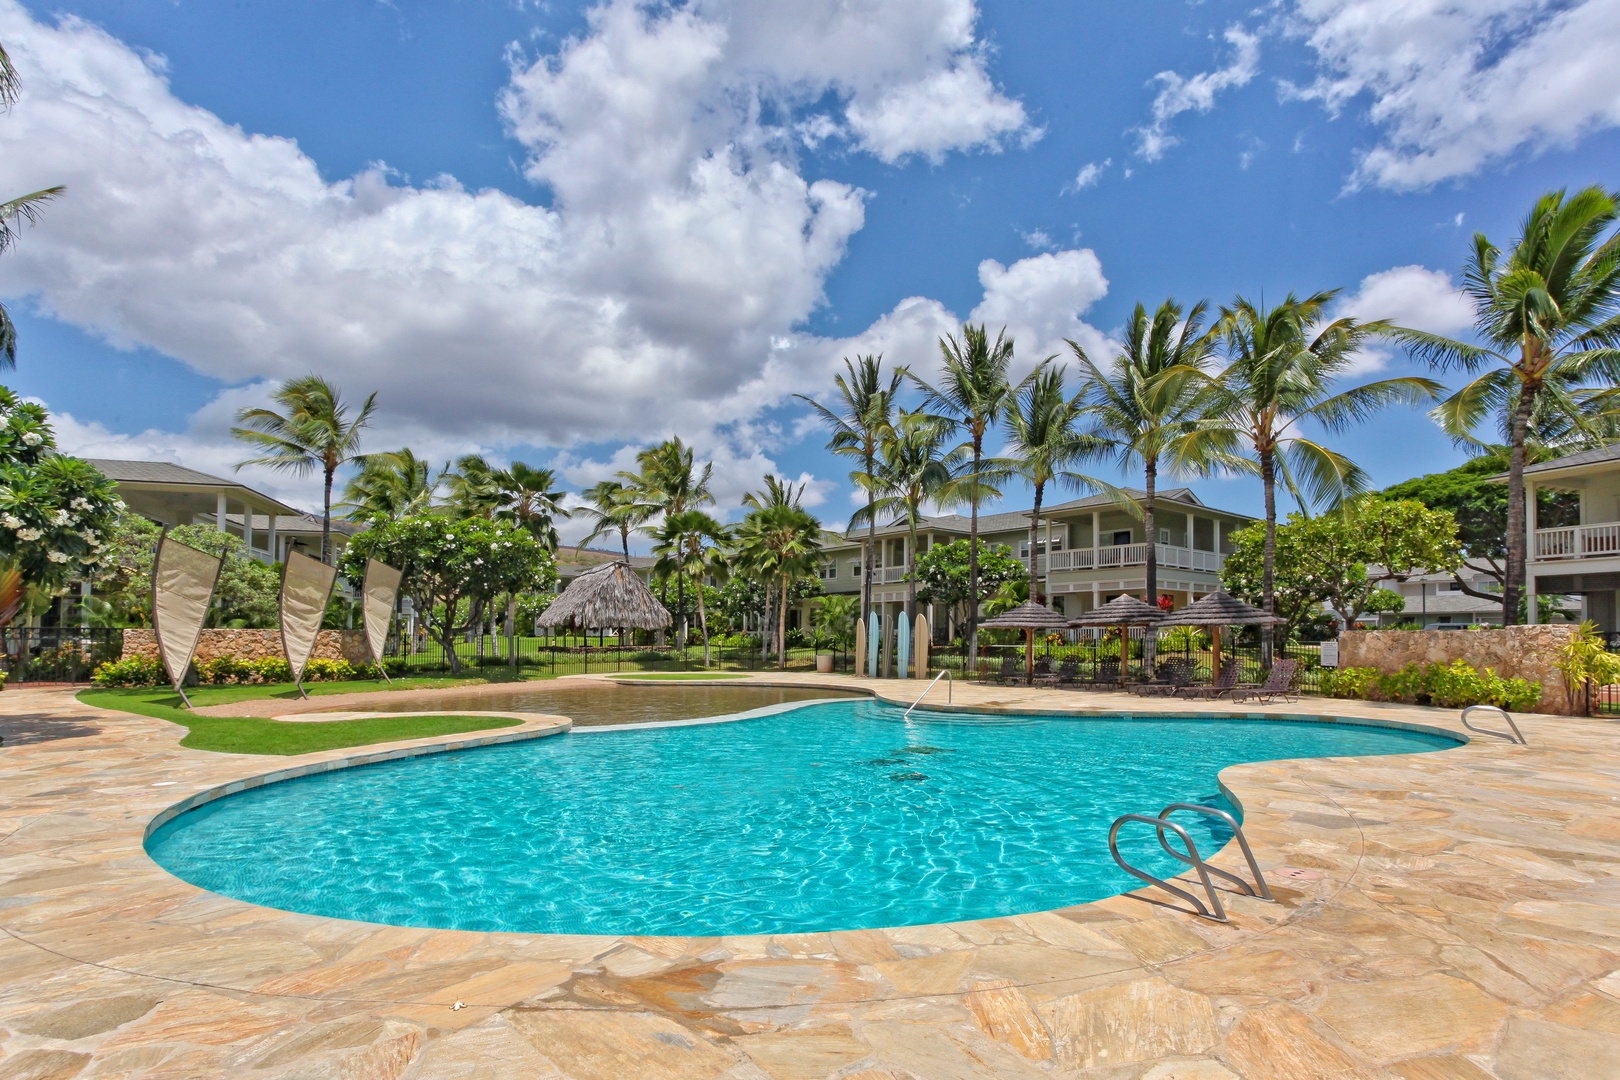 Kapolei Vacation Rentals, Coconut Plantation 1086-4 - Take a dip in the crystal blue waters of the pool.